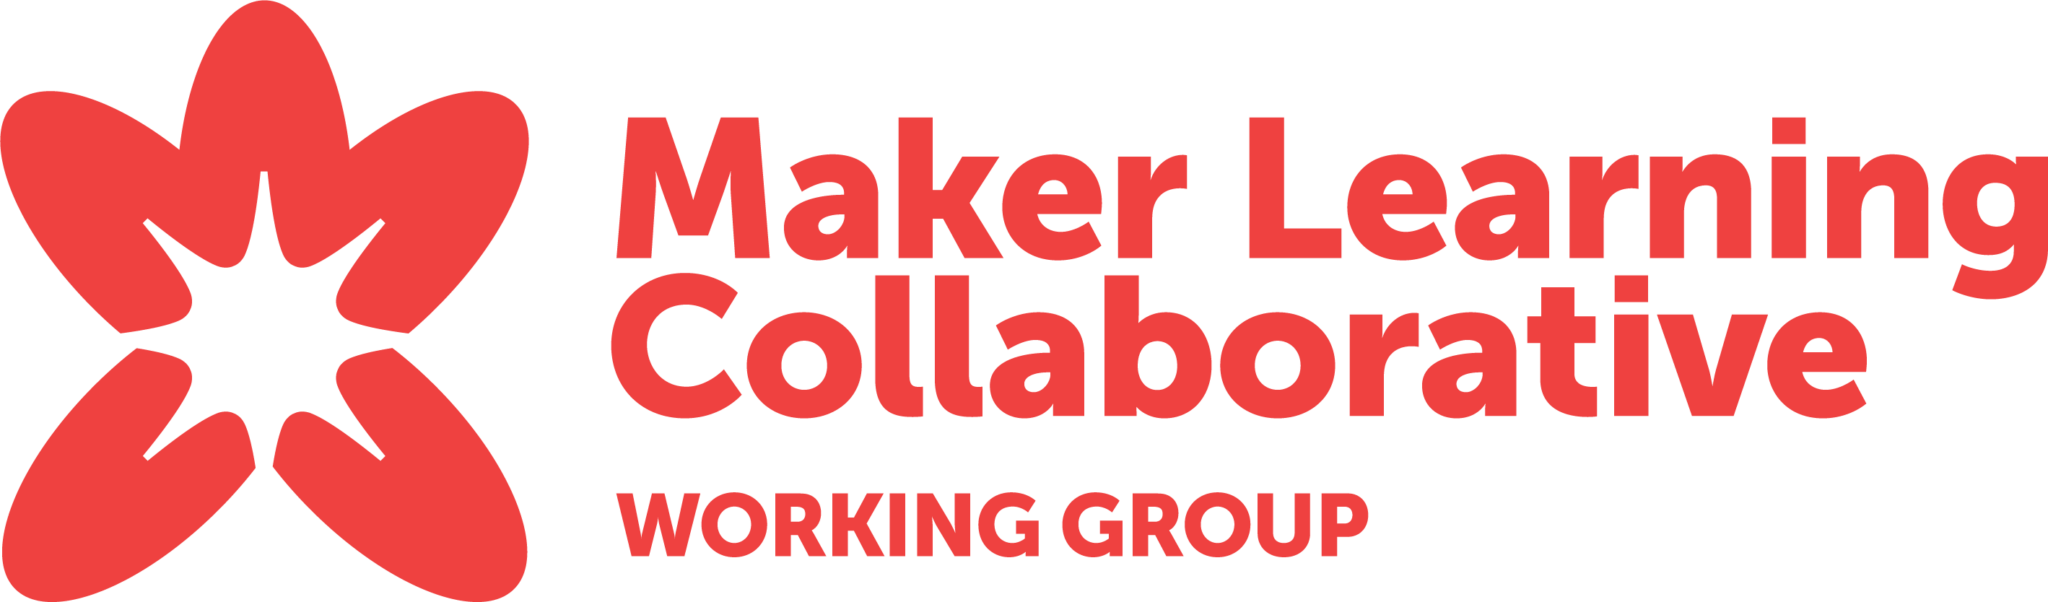 Working group logo for